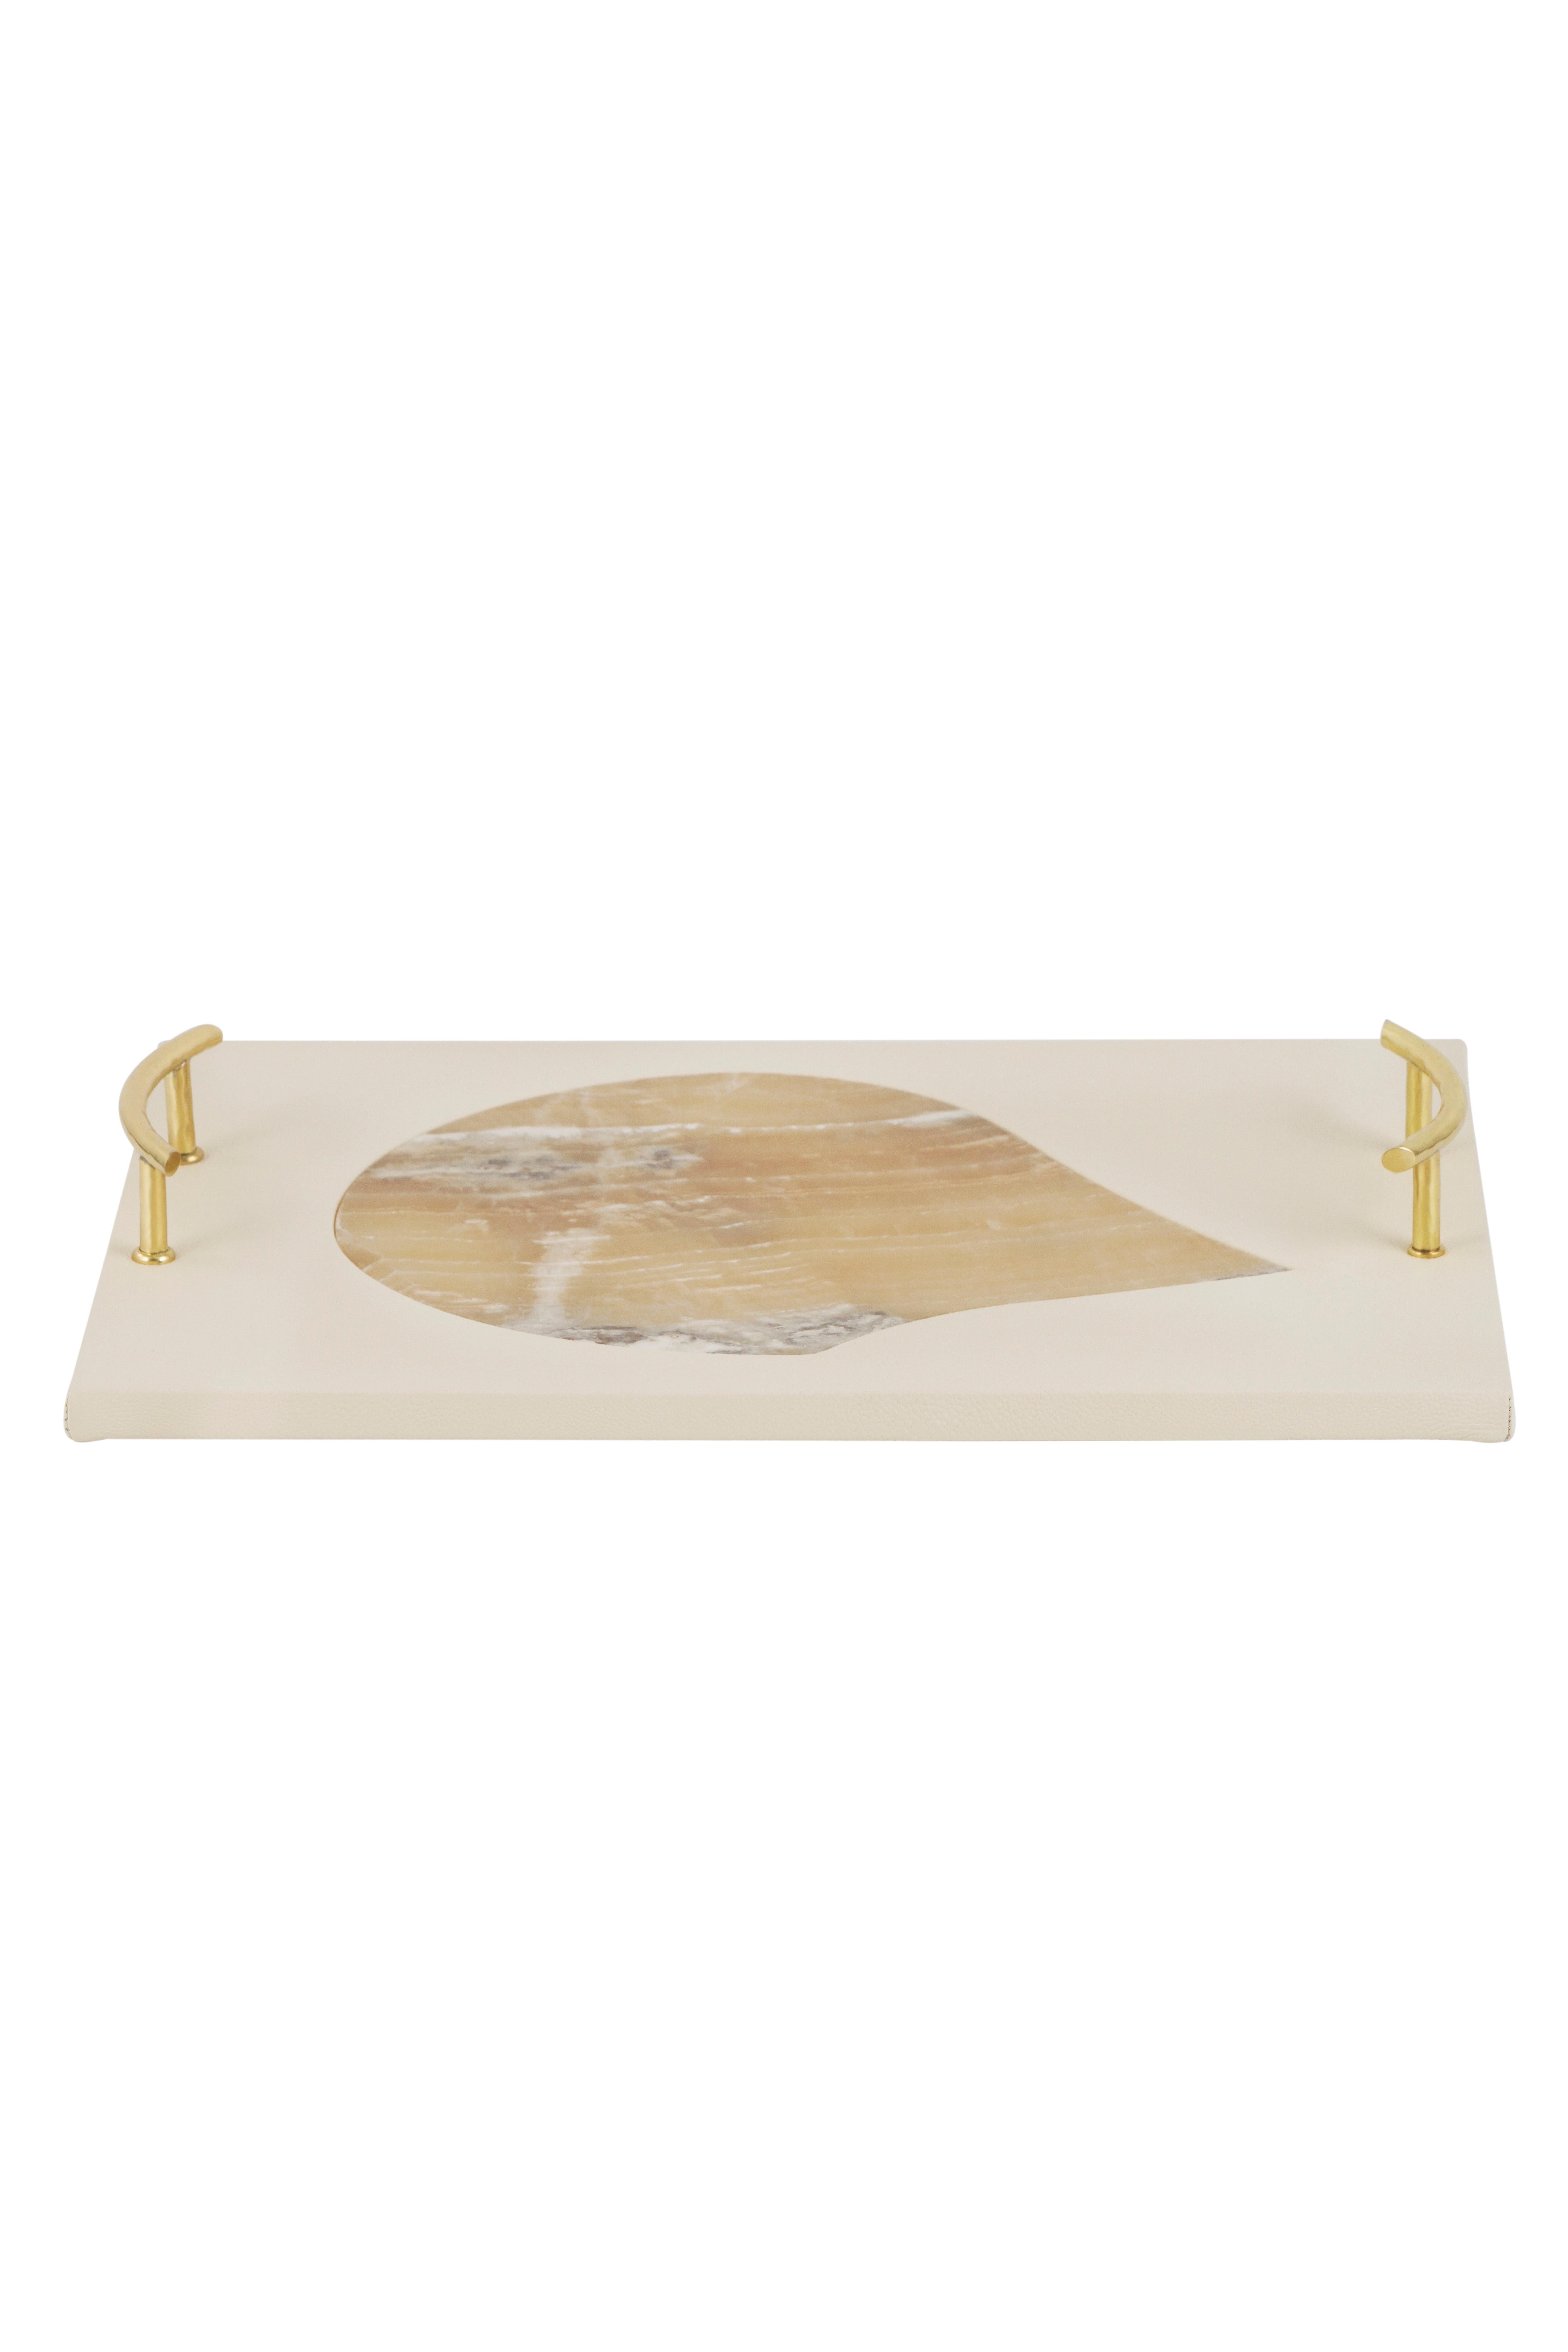 Serving Tray, Lusitanus Home Collection, Handcrafted in Portugal - Europe by Lusitanus Home.

A sublime serving tray, Oshu was design to uplift layback moments. A serving tray upholstered in cream leather with inlaid Shadow onyx and polished brass